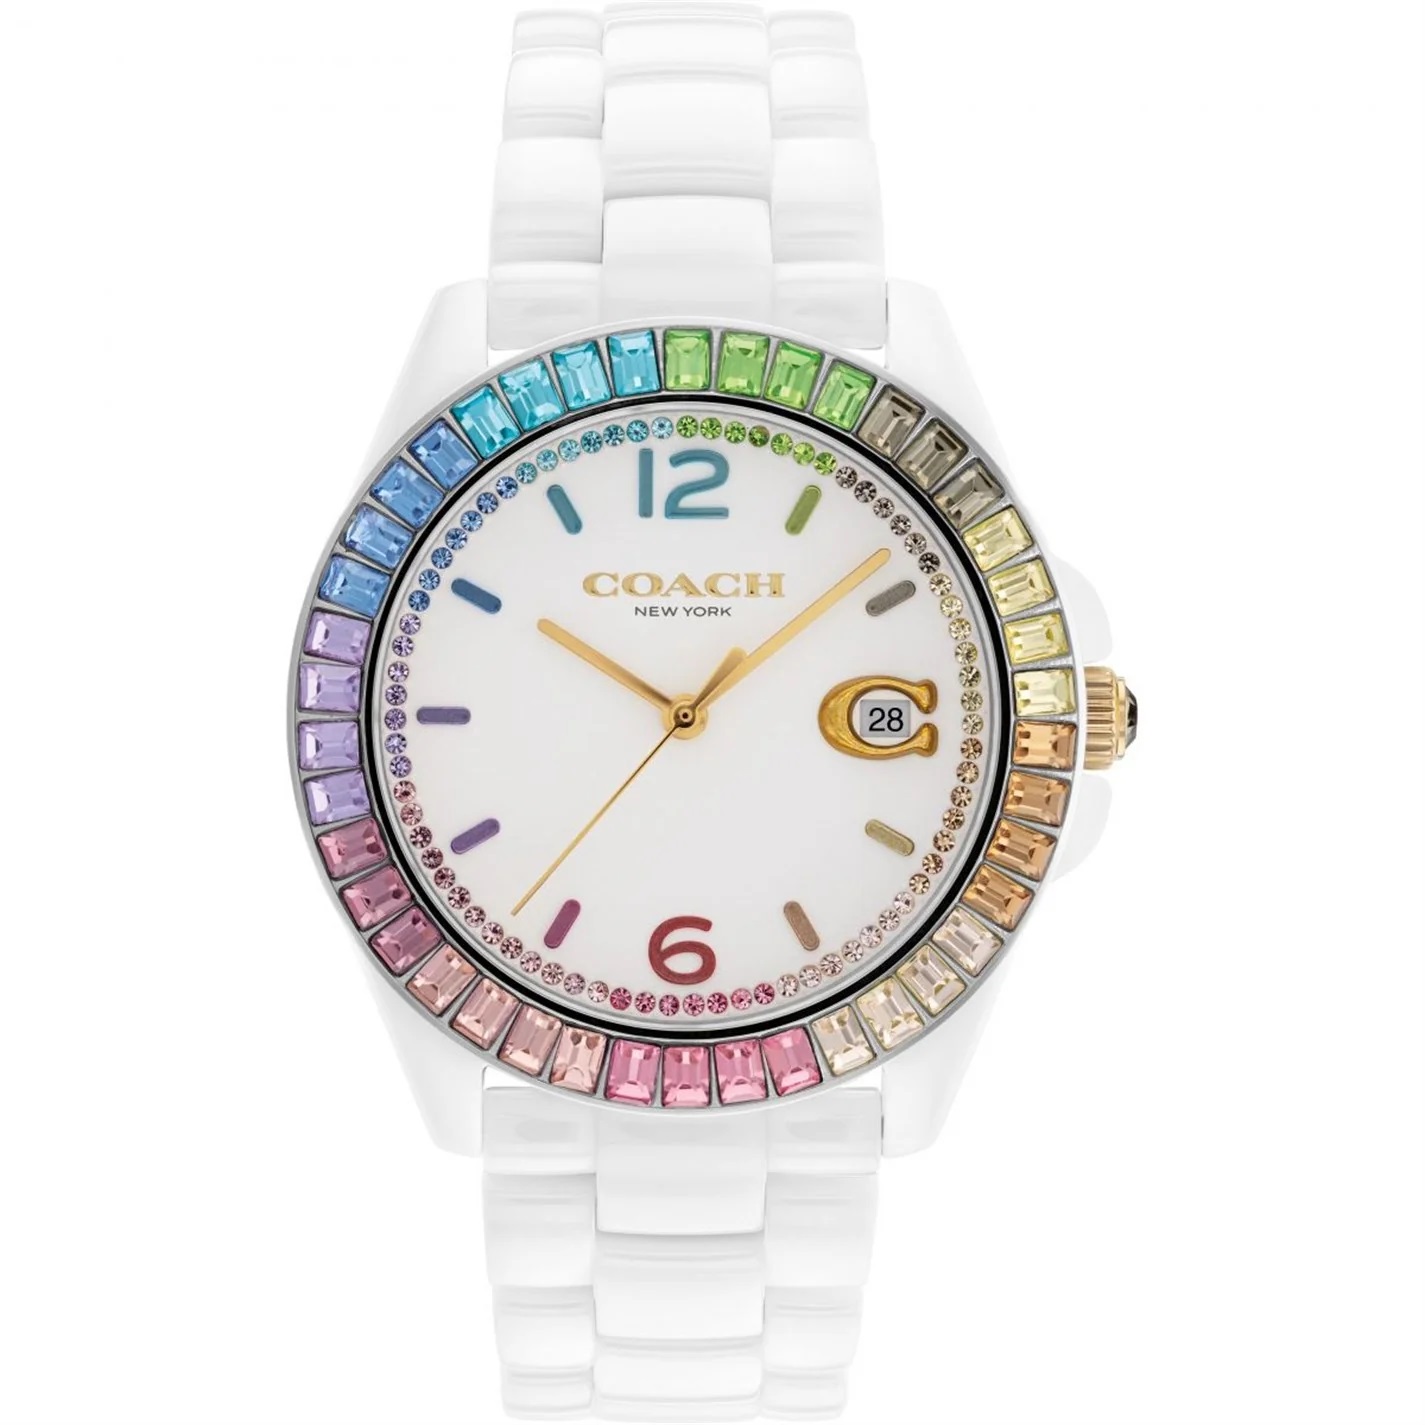 ĐỒNG HỒ ĐEO TAY NỮ COACH LADIES GREYSON MULTI-COLOR CRYSTAL ACCENT RAINBOW BEZEL WHITE CERAMIC WATCH 14504019 2